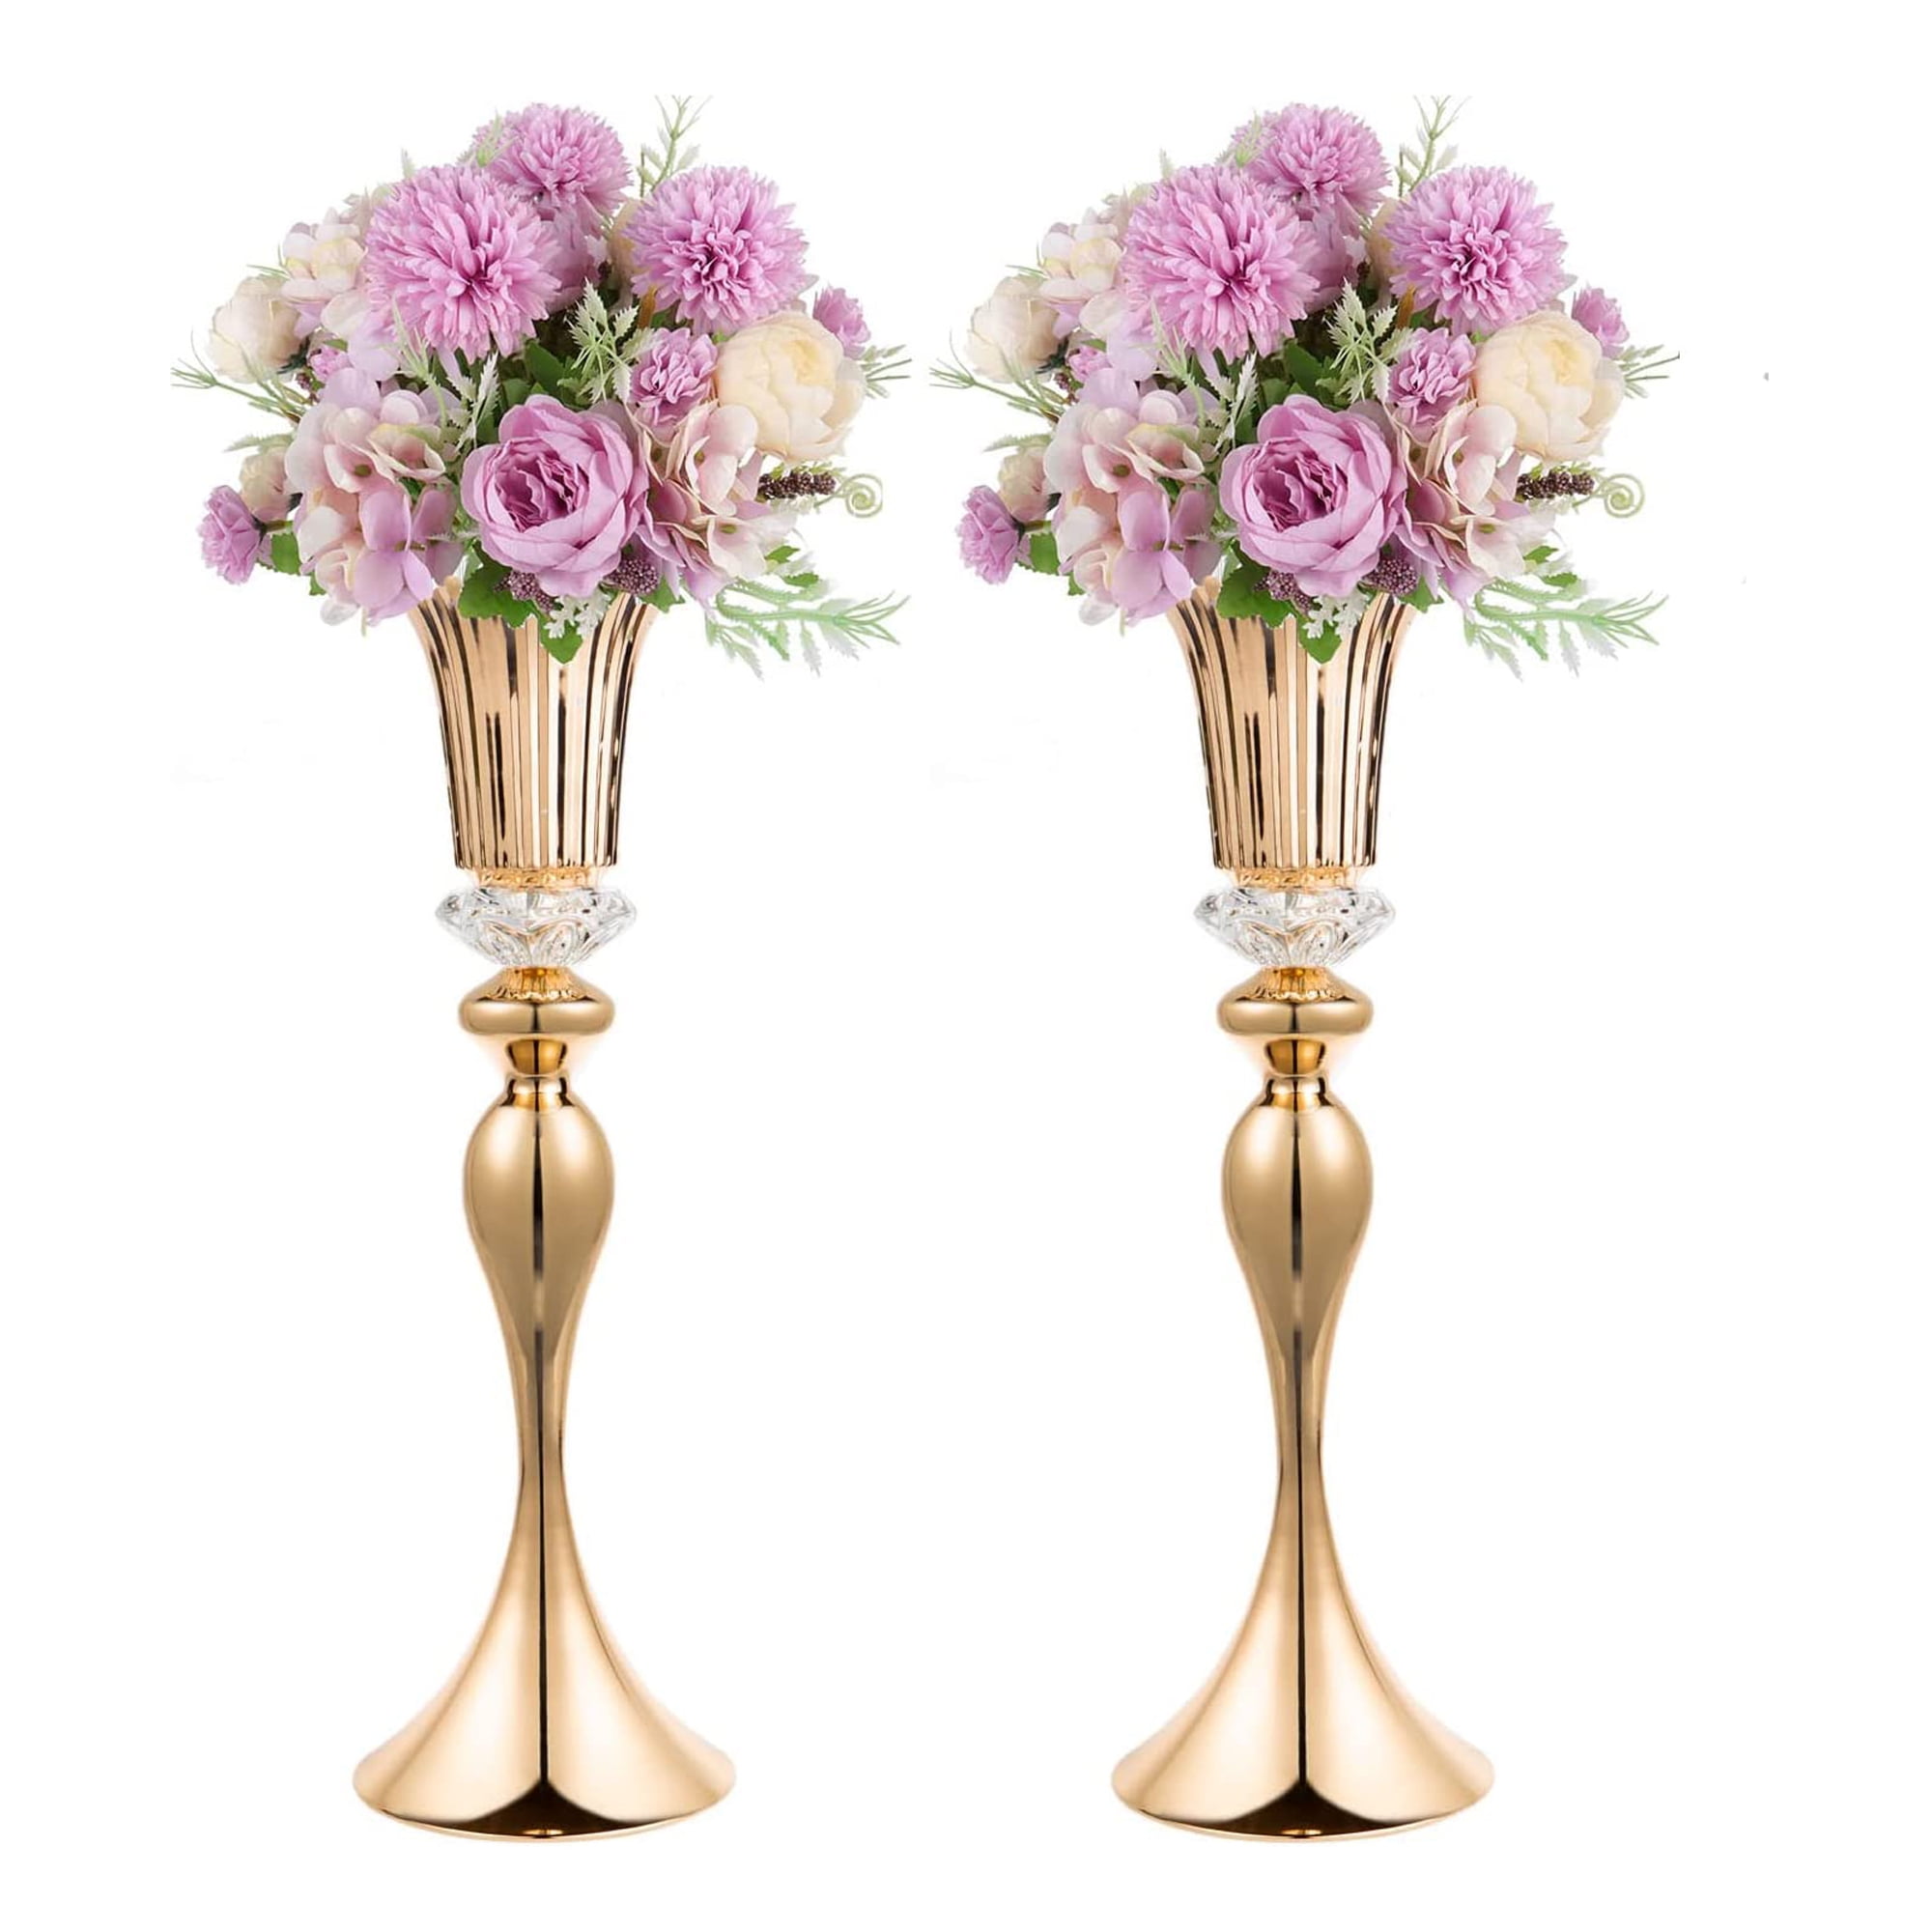 2Pcs 23.6 inch-35.4in Tall Wedding Centerpieces Flower Vases Crystal  Display Urn